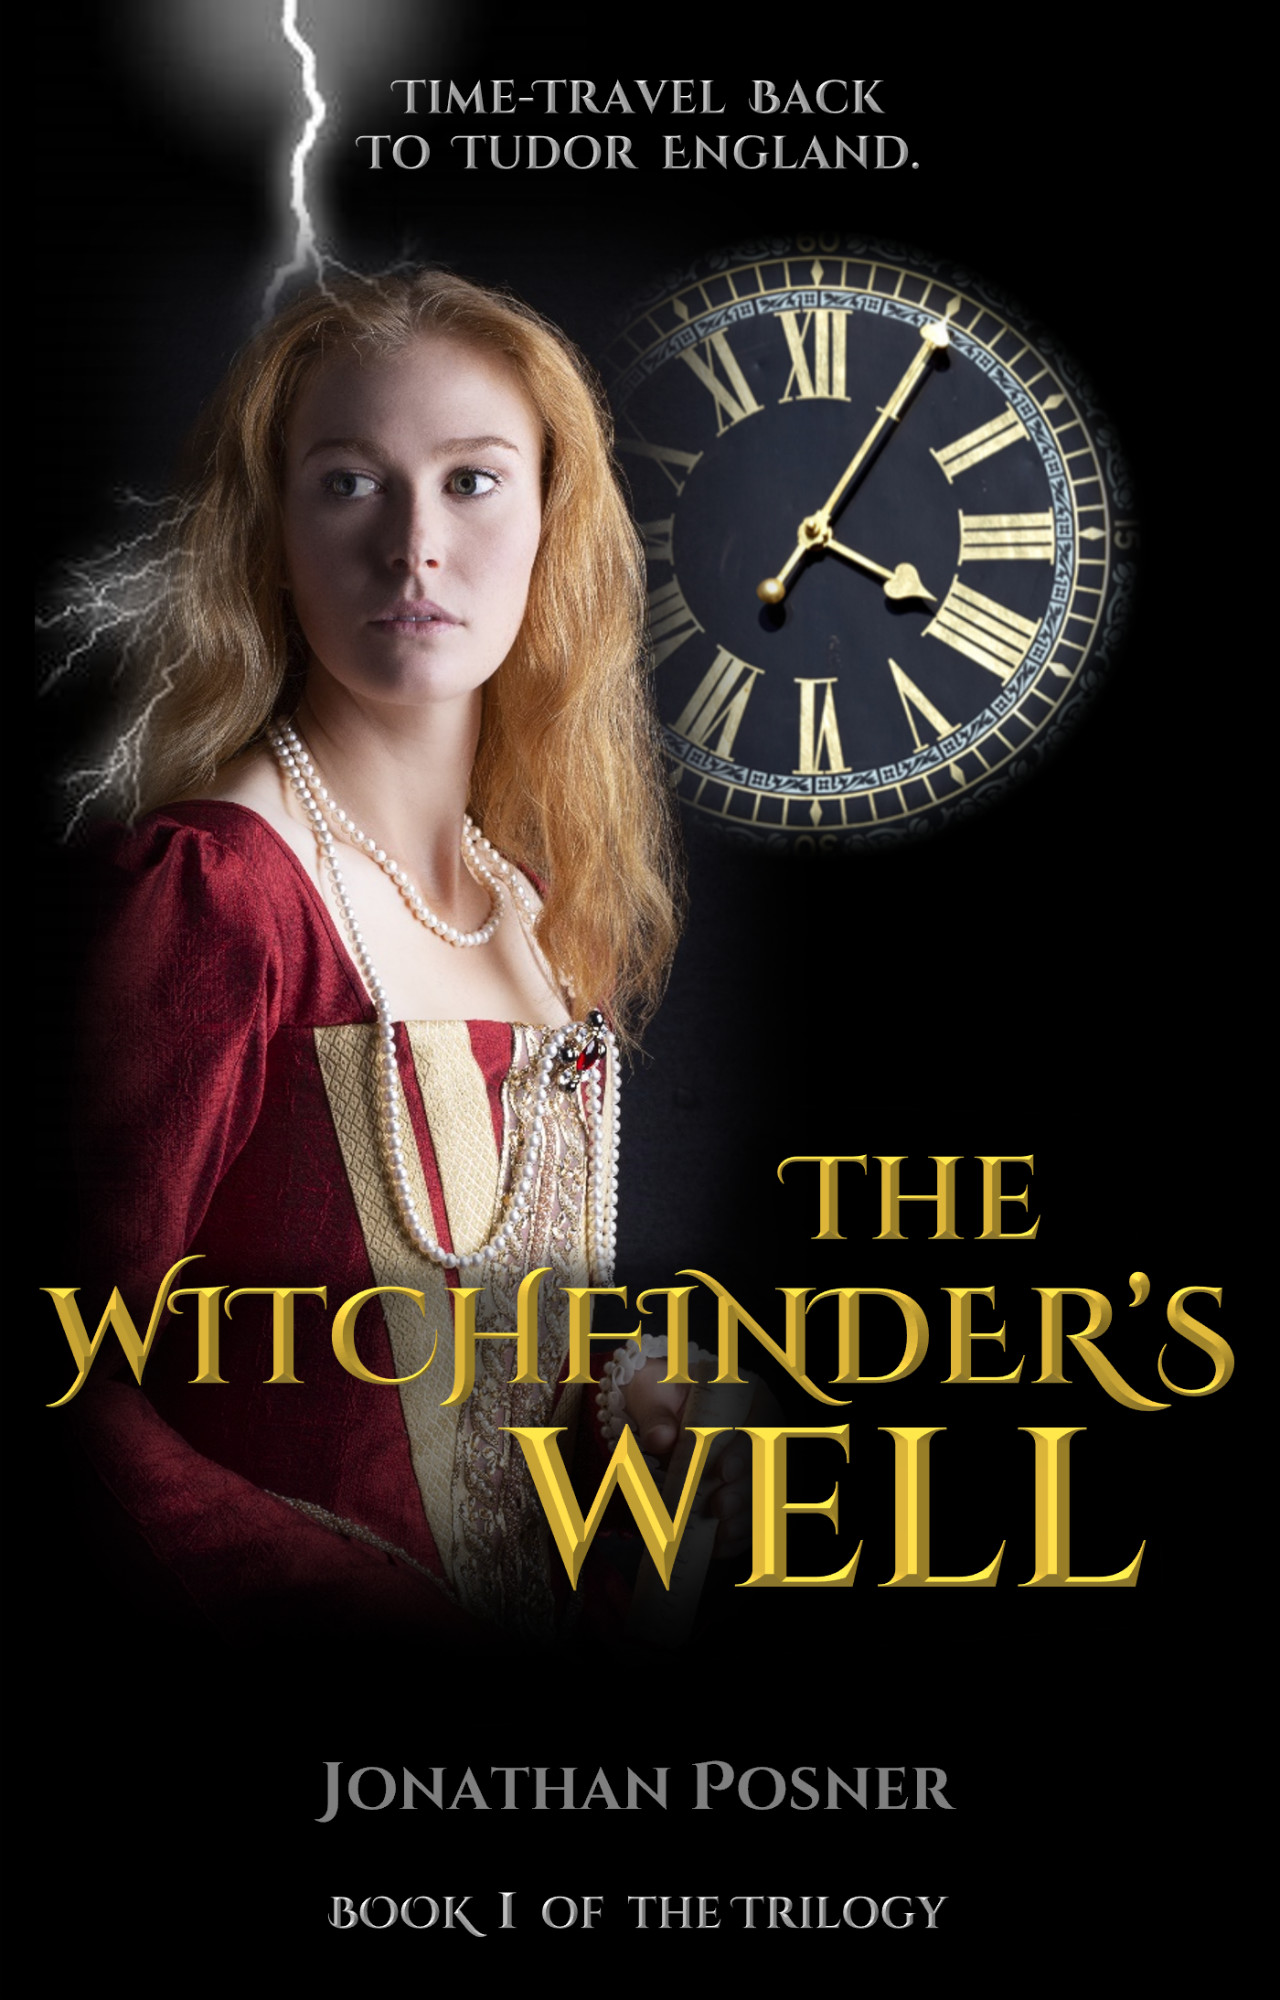 The Witchfinder's Well